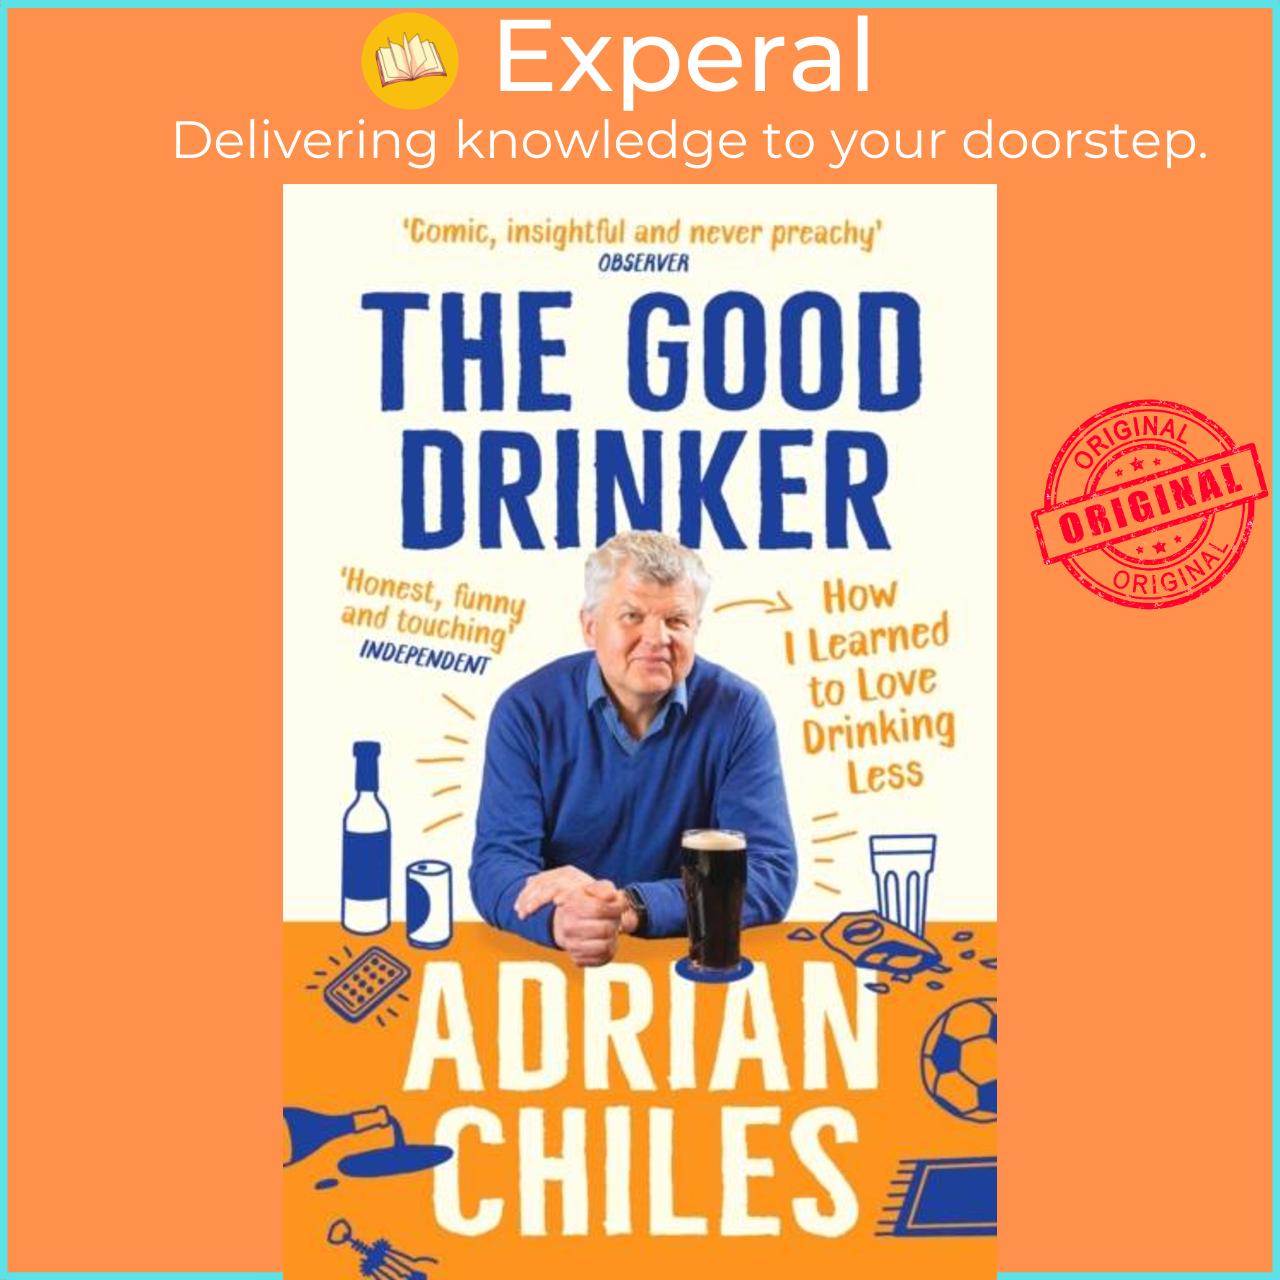 Hình ảnh Sách - The Good Drinker - How I Learned to Love Drinking Less by Adrian Chiles (UK edition, paperback)